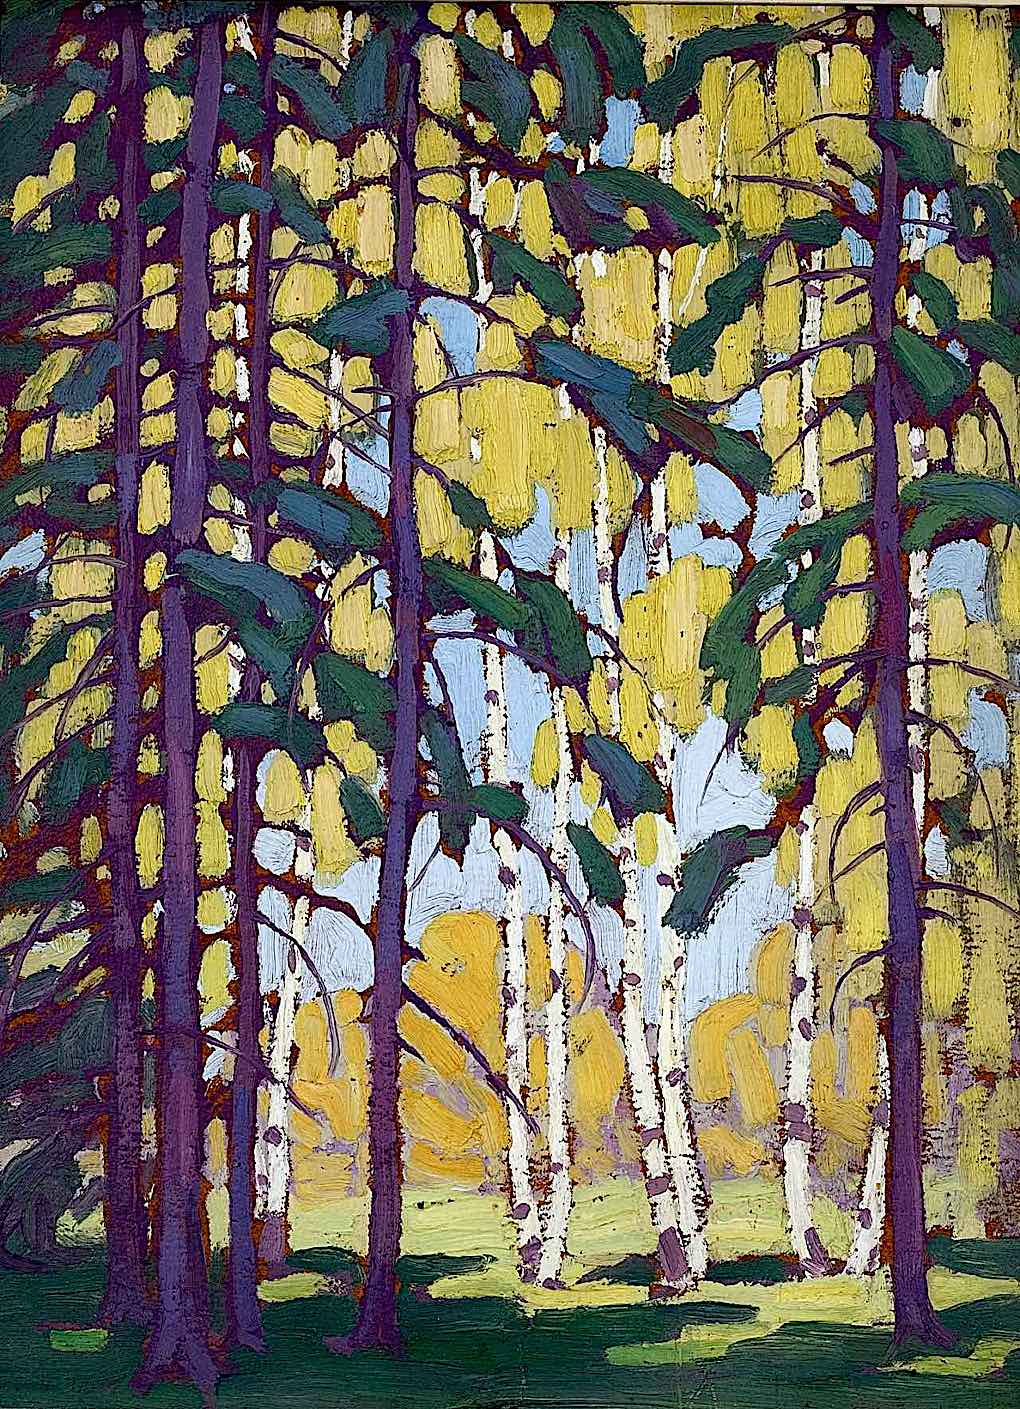 a Lawren Harris painting Canada 1920s, The Group of Seven, trees in shade